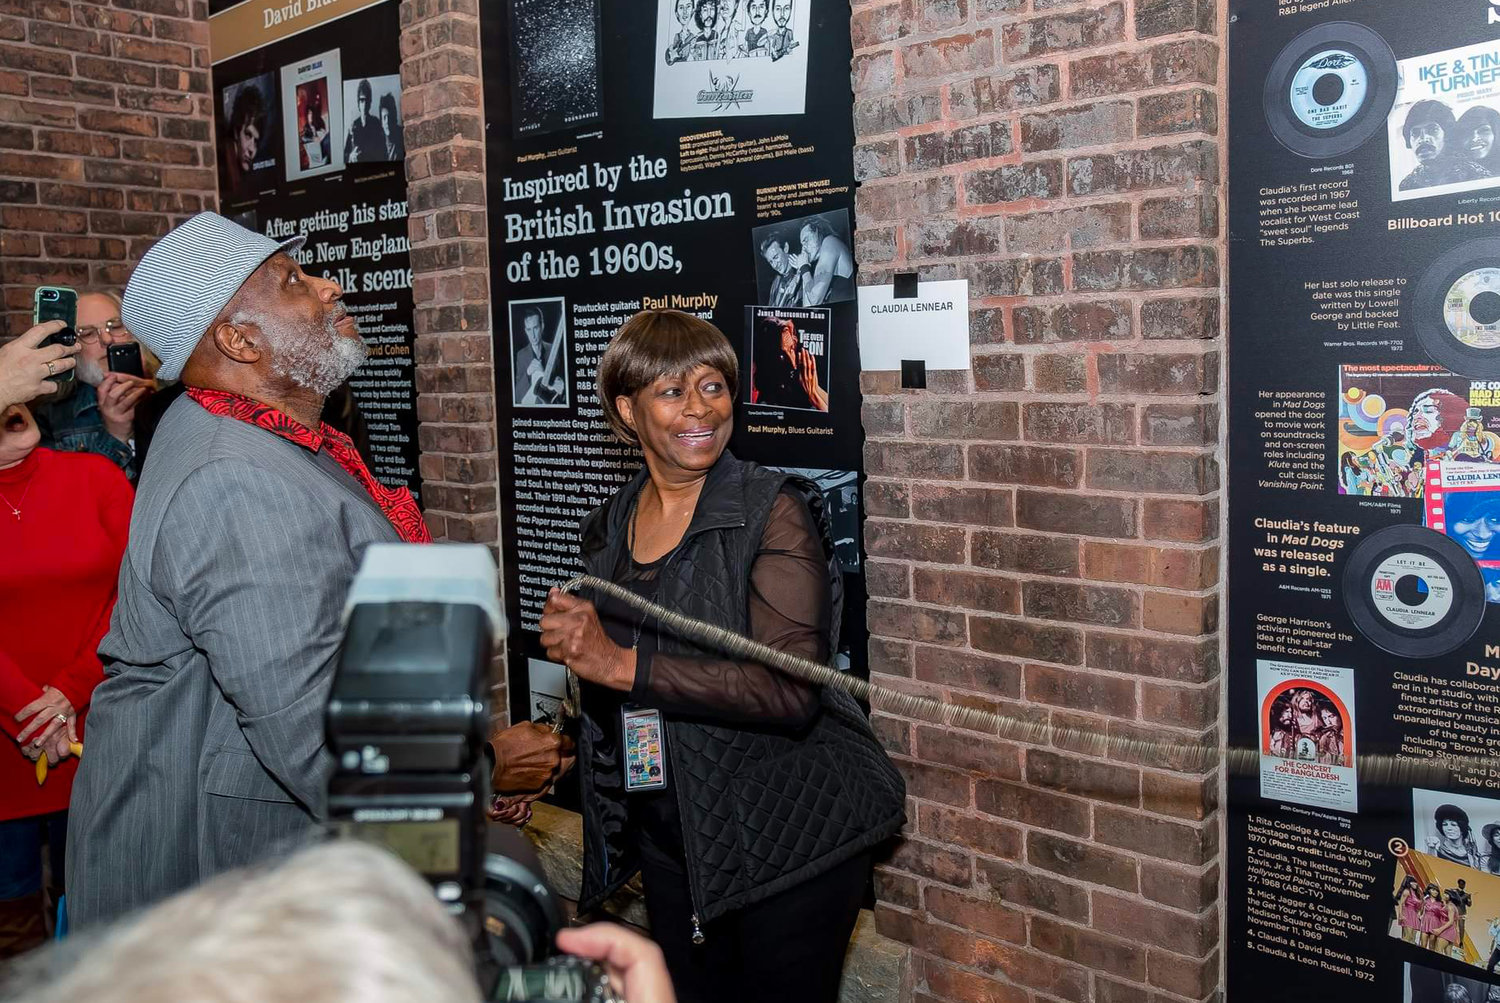 Taj Mahal proudly looks on as friend Claudia Lennear is inducted into the Rhode Island Music Hall of Fame in 2019